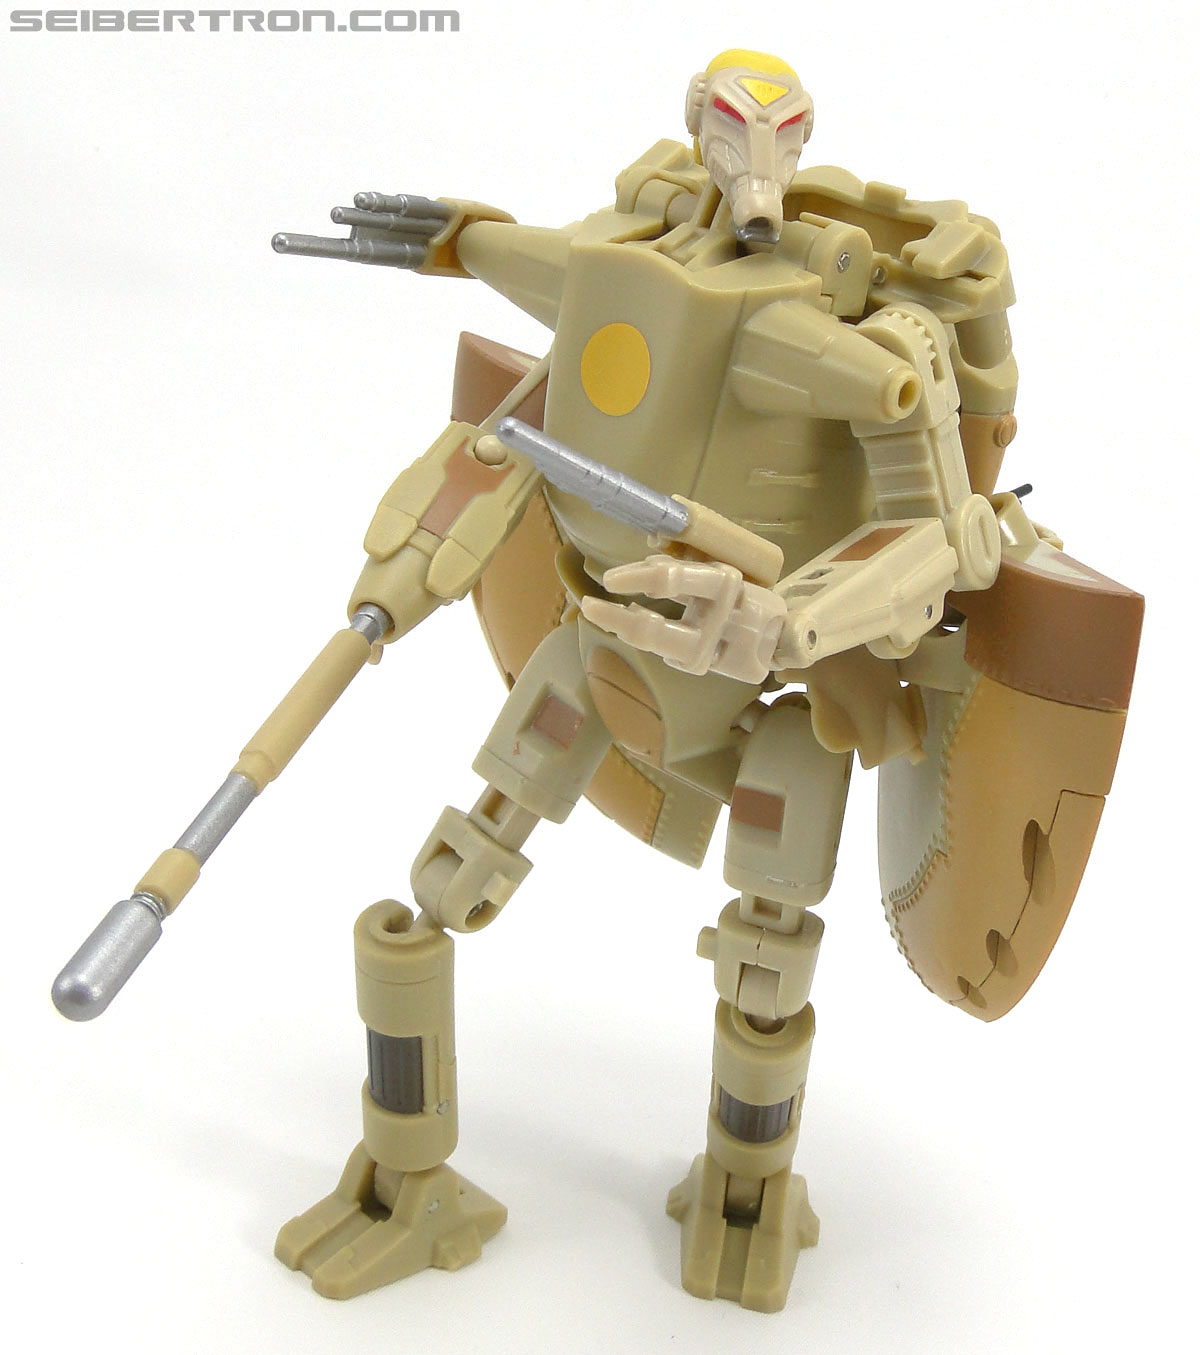 Star Wars Transformers Battle Droid Commader (Armored Assault Tank) (Battle Droid Commader) (Image #70 of 85)